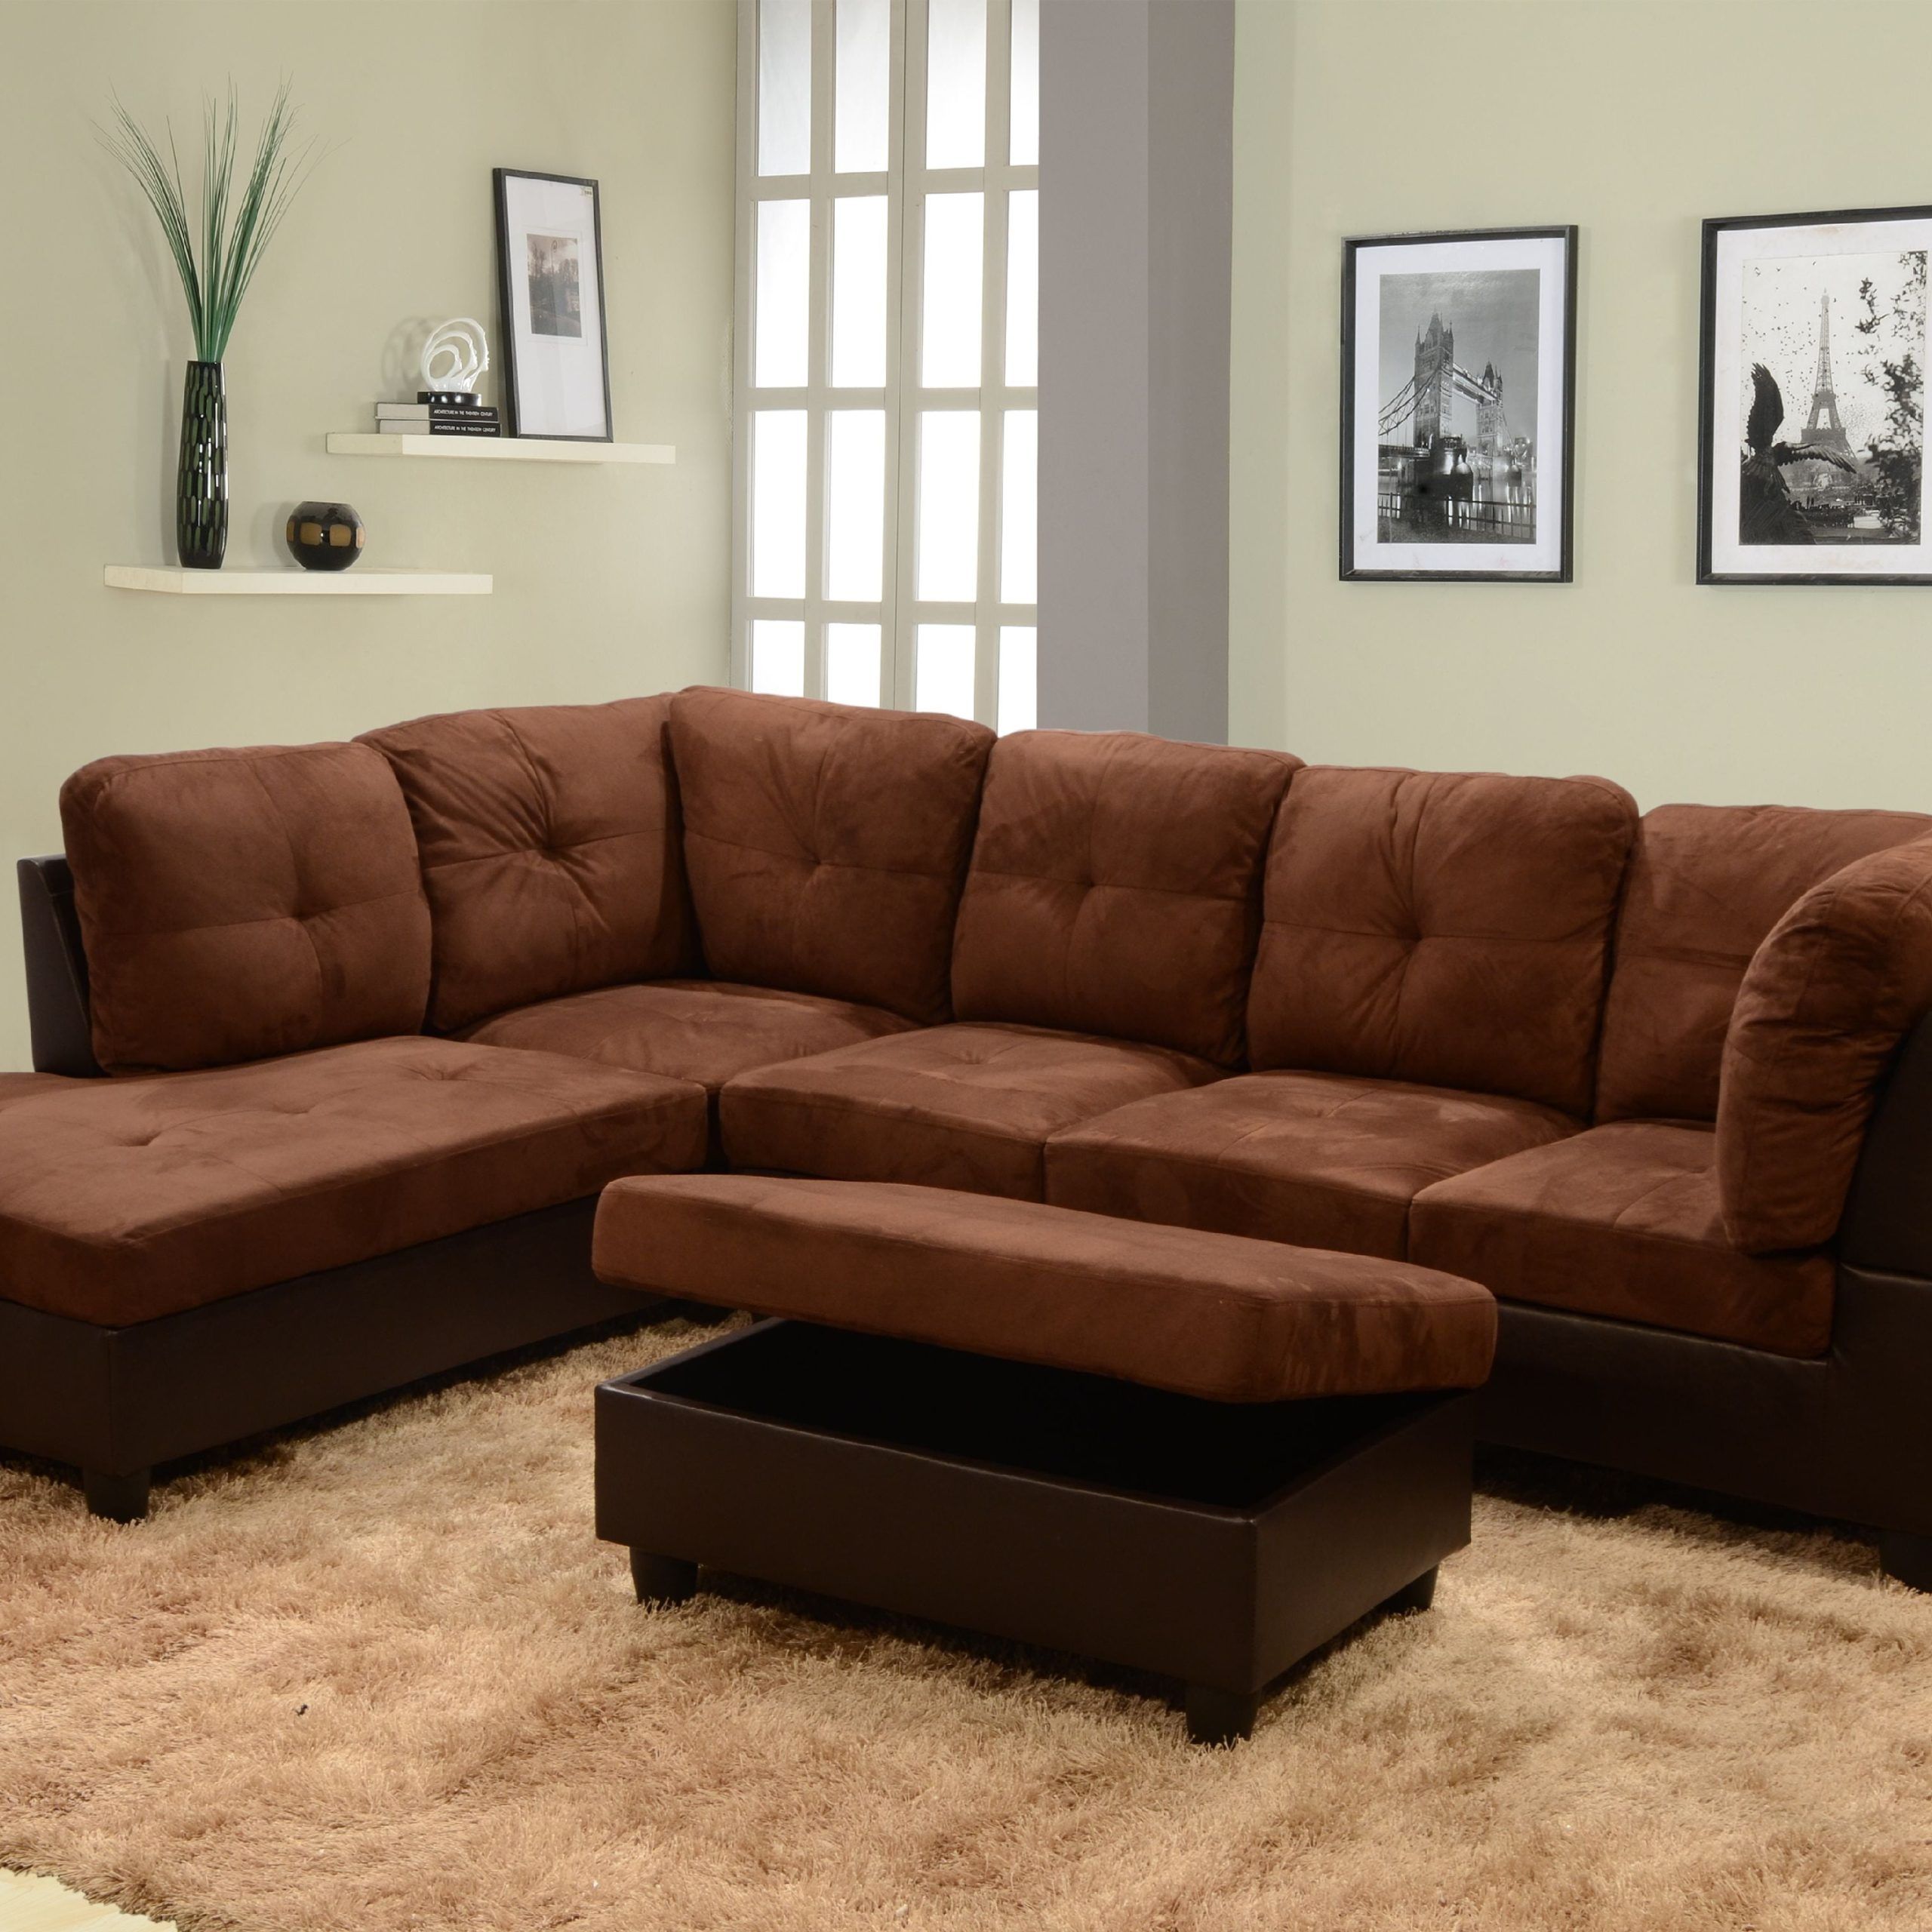 Matt Right Facing Sectional Sofa With Ottoman,chocolate – Walmart Pertaining To Most Recently Released Sofas With Ottomans In Brown (View 5 of 15)